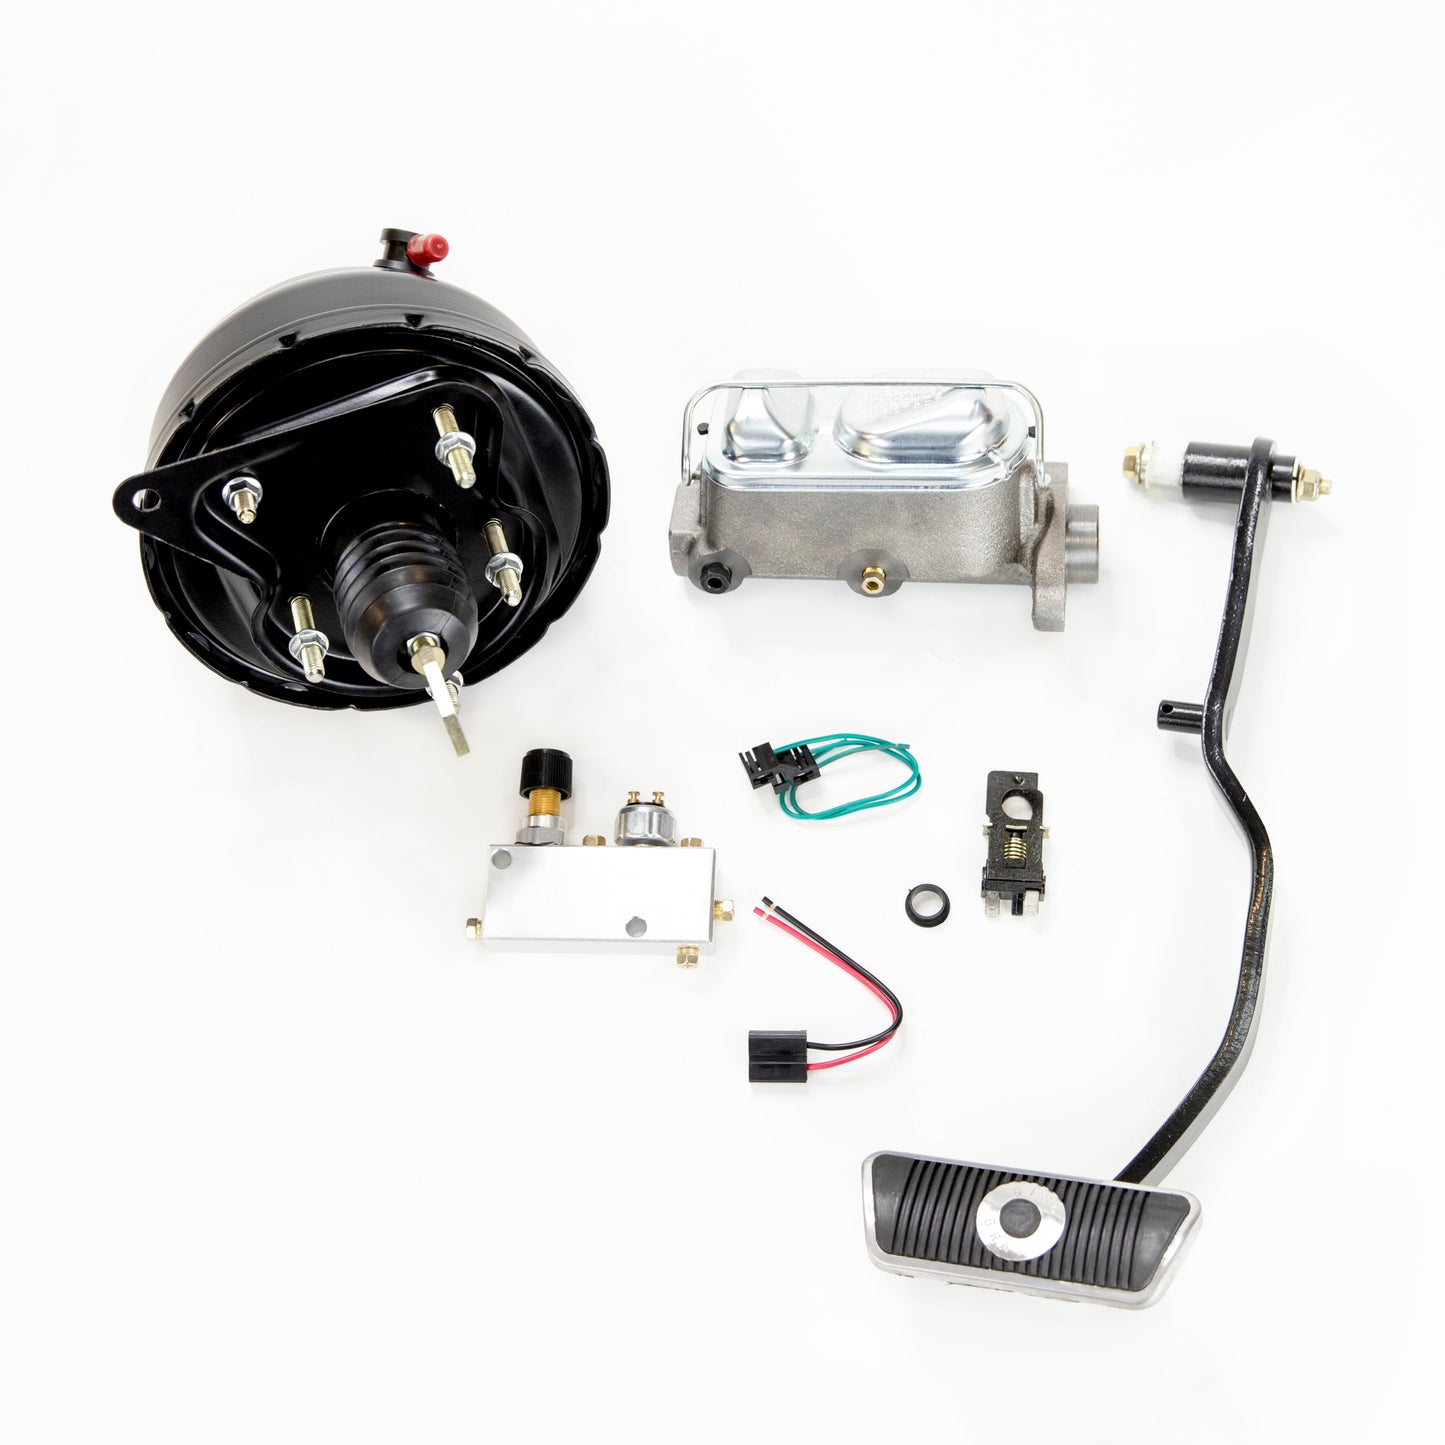 Power Brake Upgrade / Replacement for an Automatic Transmission 67-70 Mustang or Cougar with Front Disc Brakes